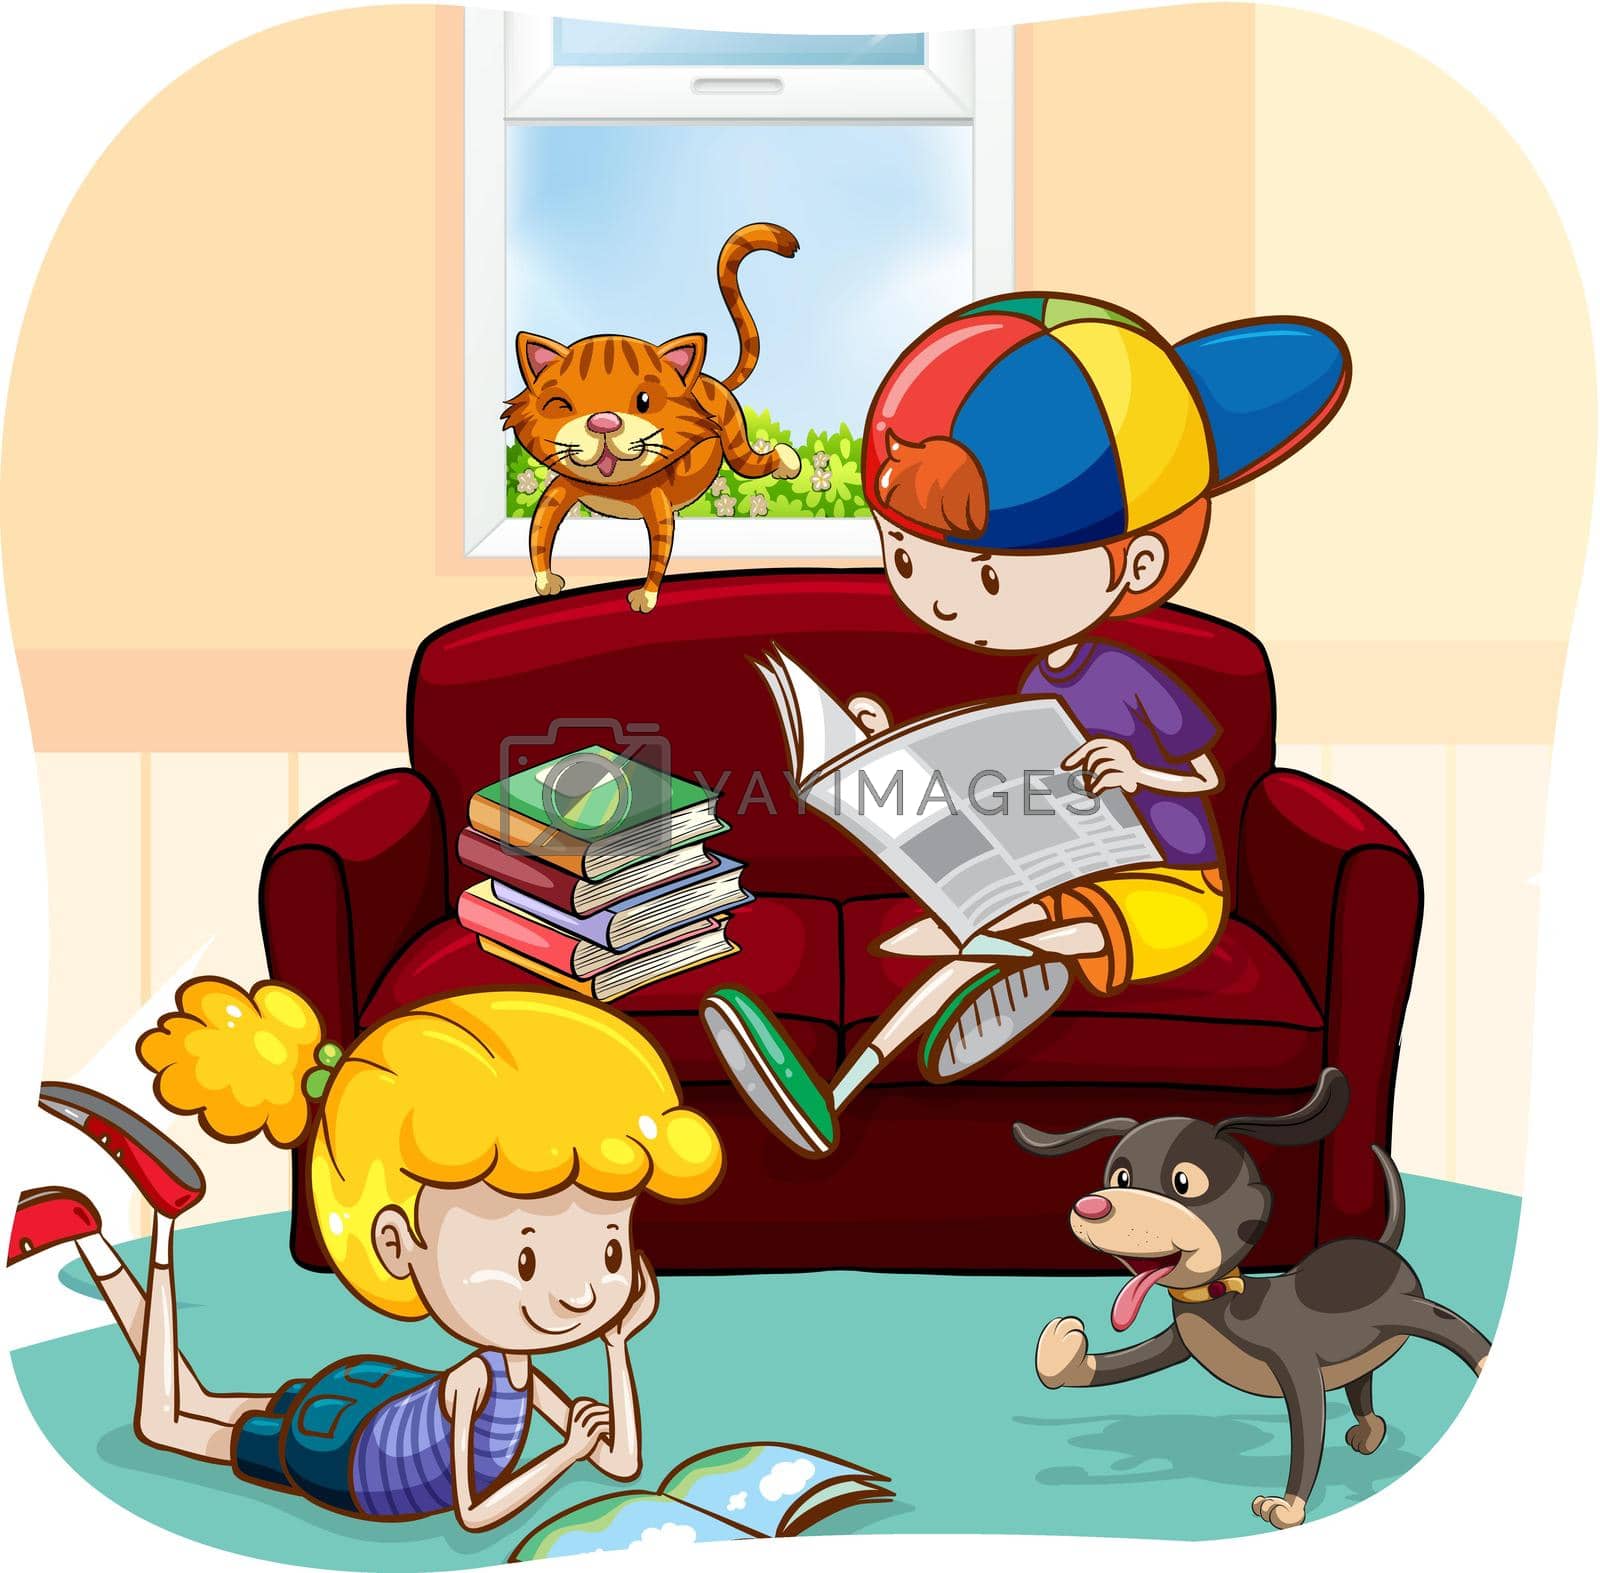 Boy and a girl reading books and newspaper with pets walking around